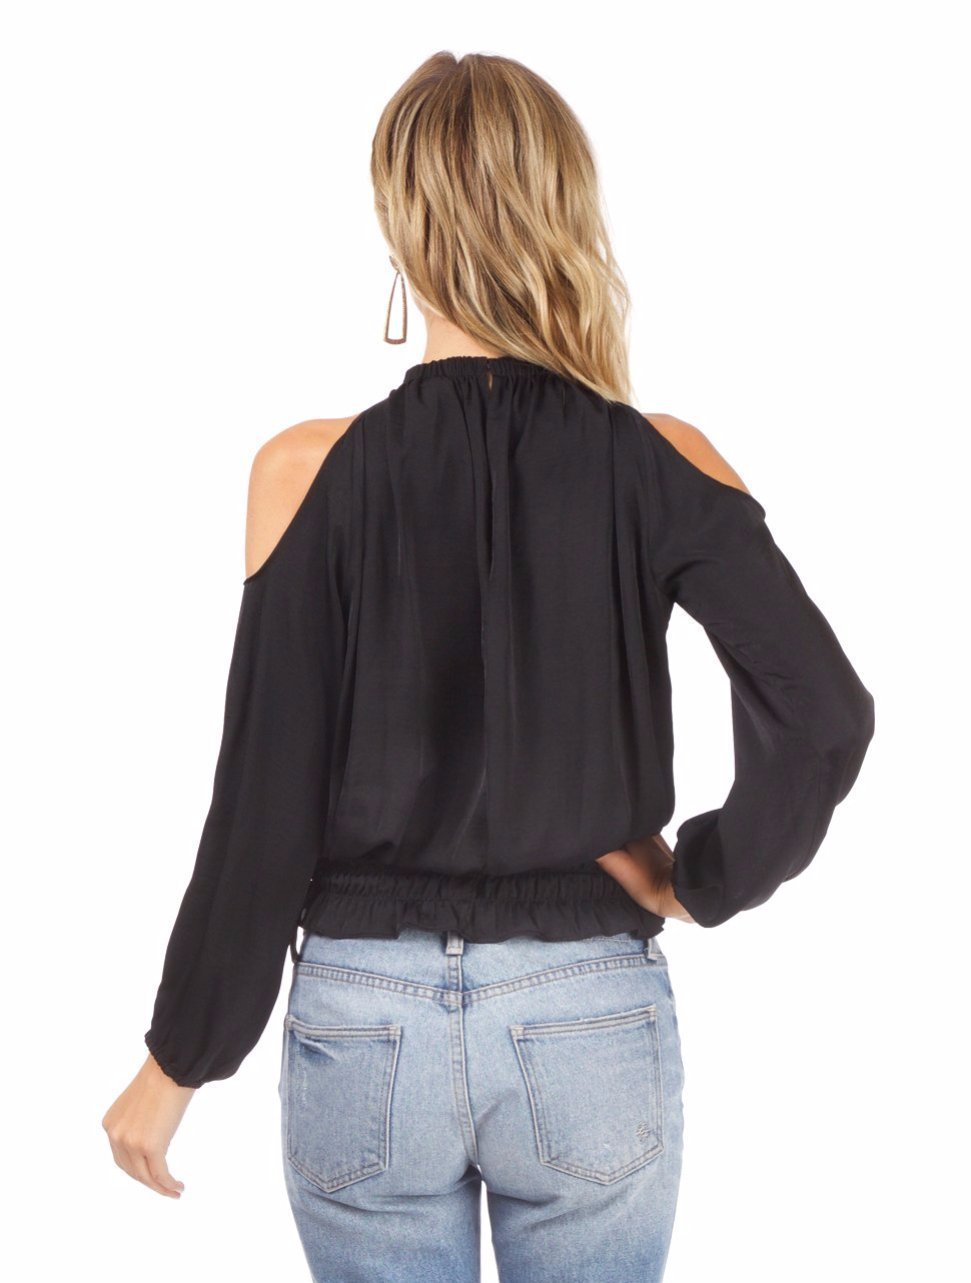 Women wearing a top rental from AQUA called Cold Shoulder Top